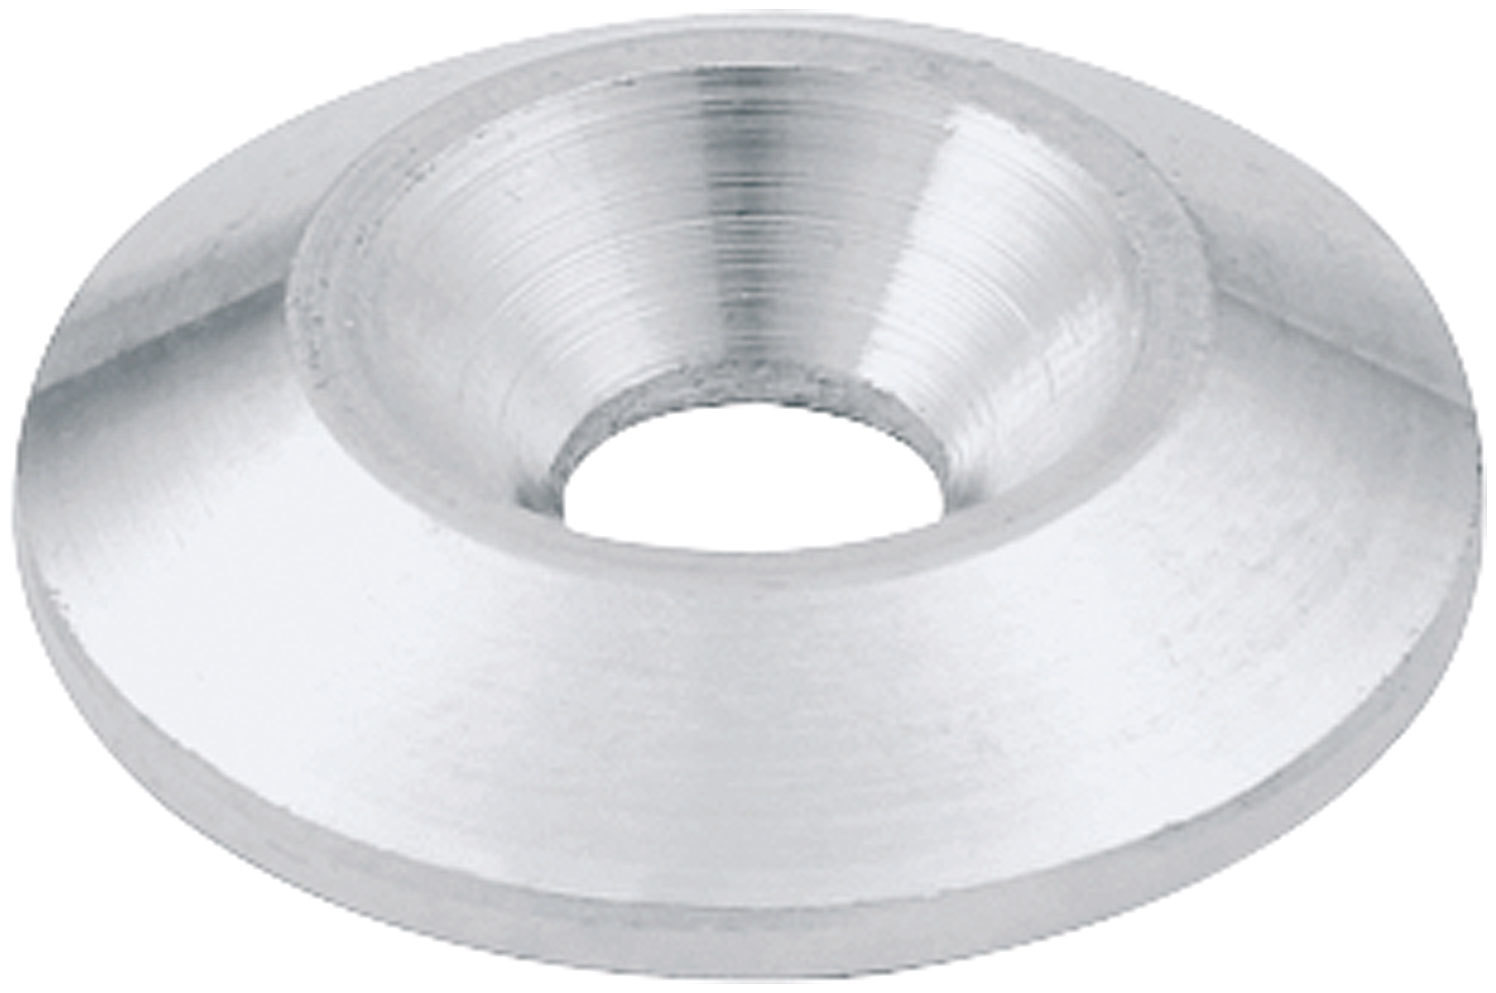 Allstar Performance 18664-50 - Countersunk Washer 1/4in x 1-1/4in 50pk